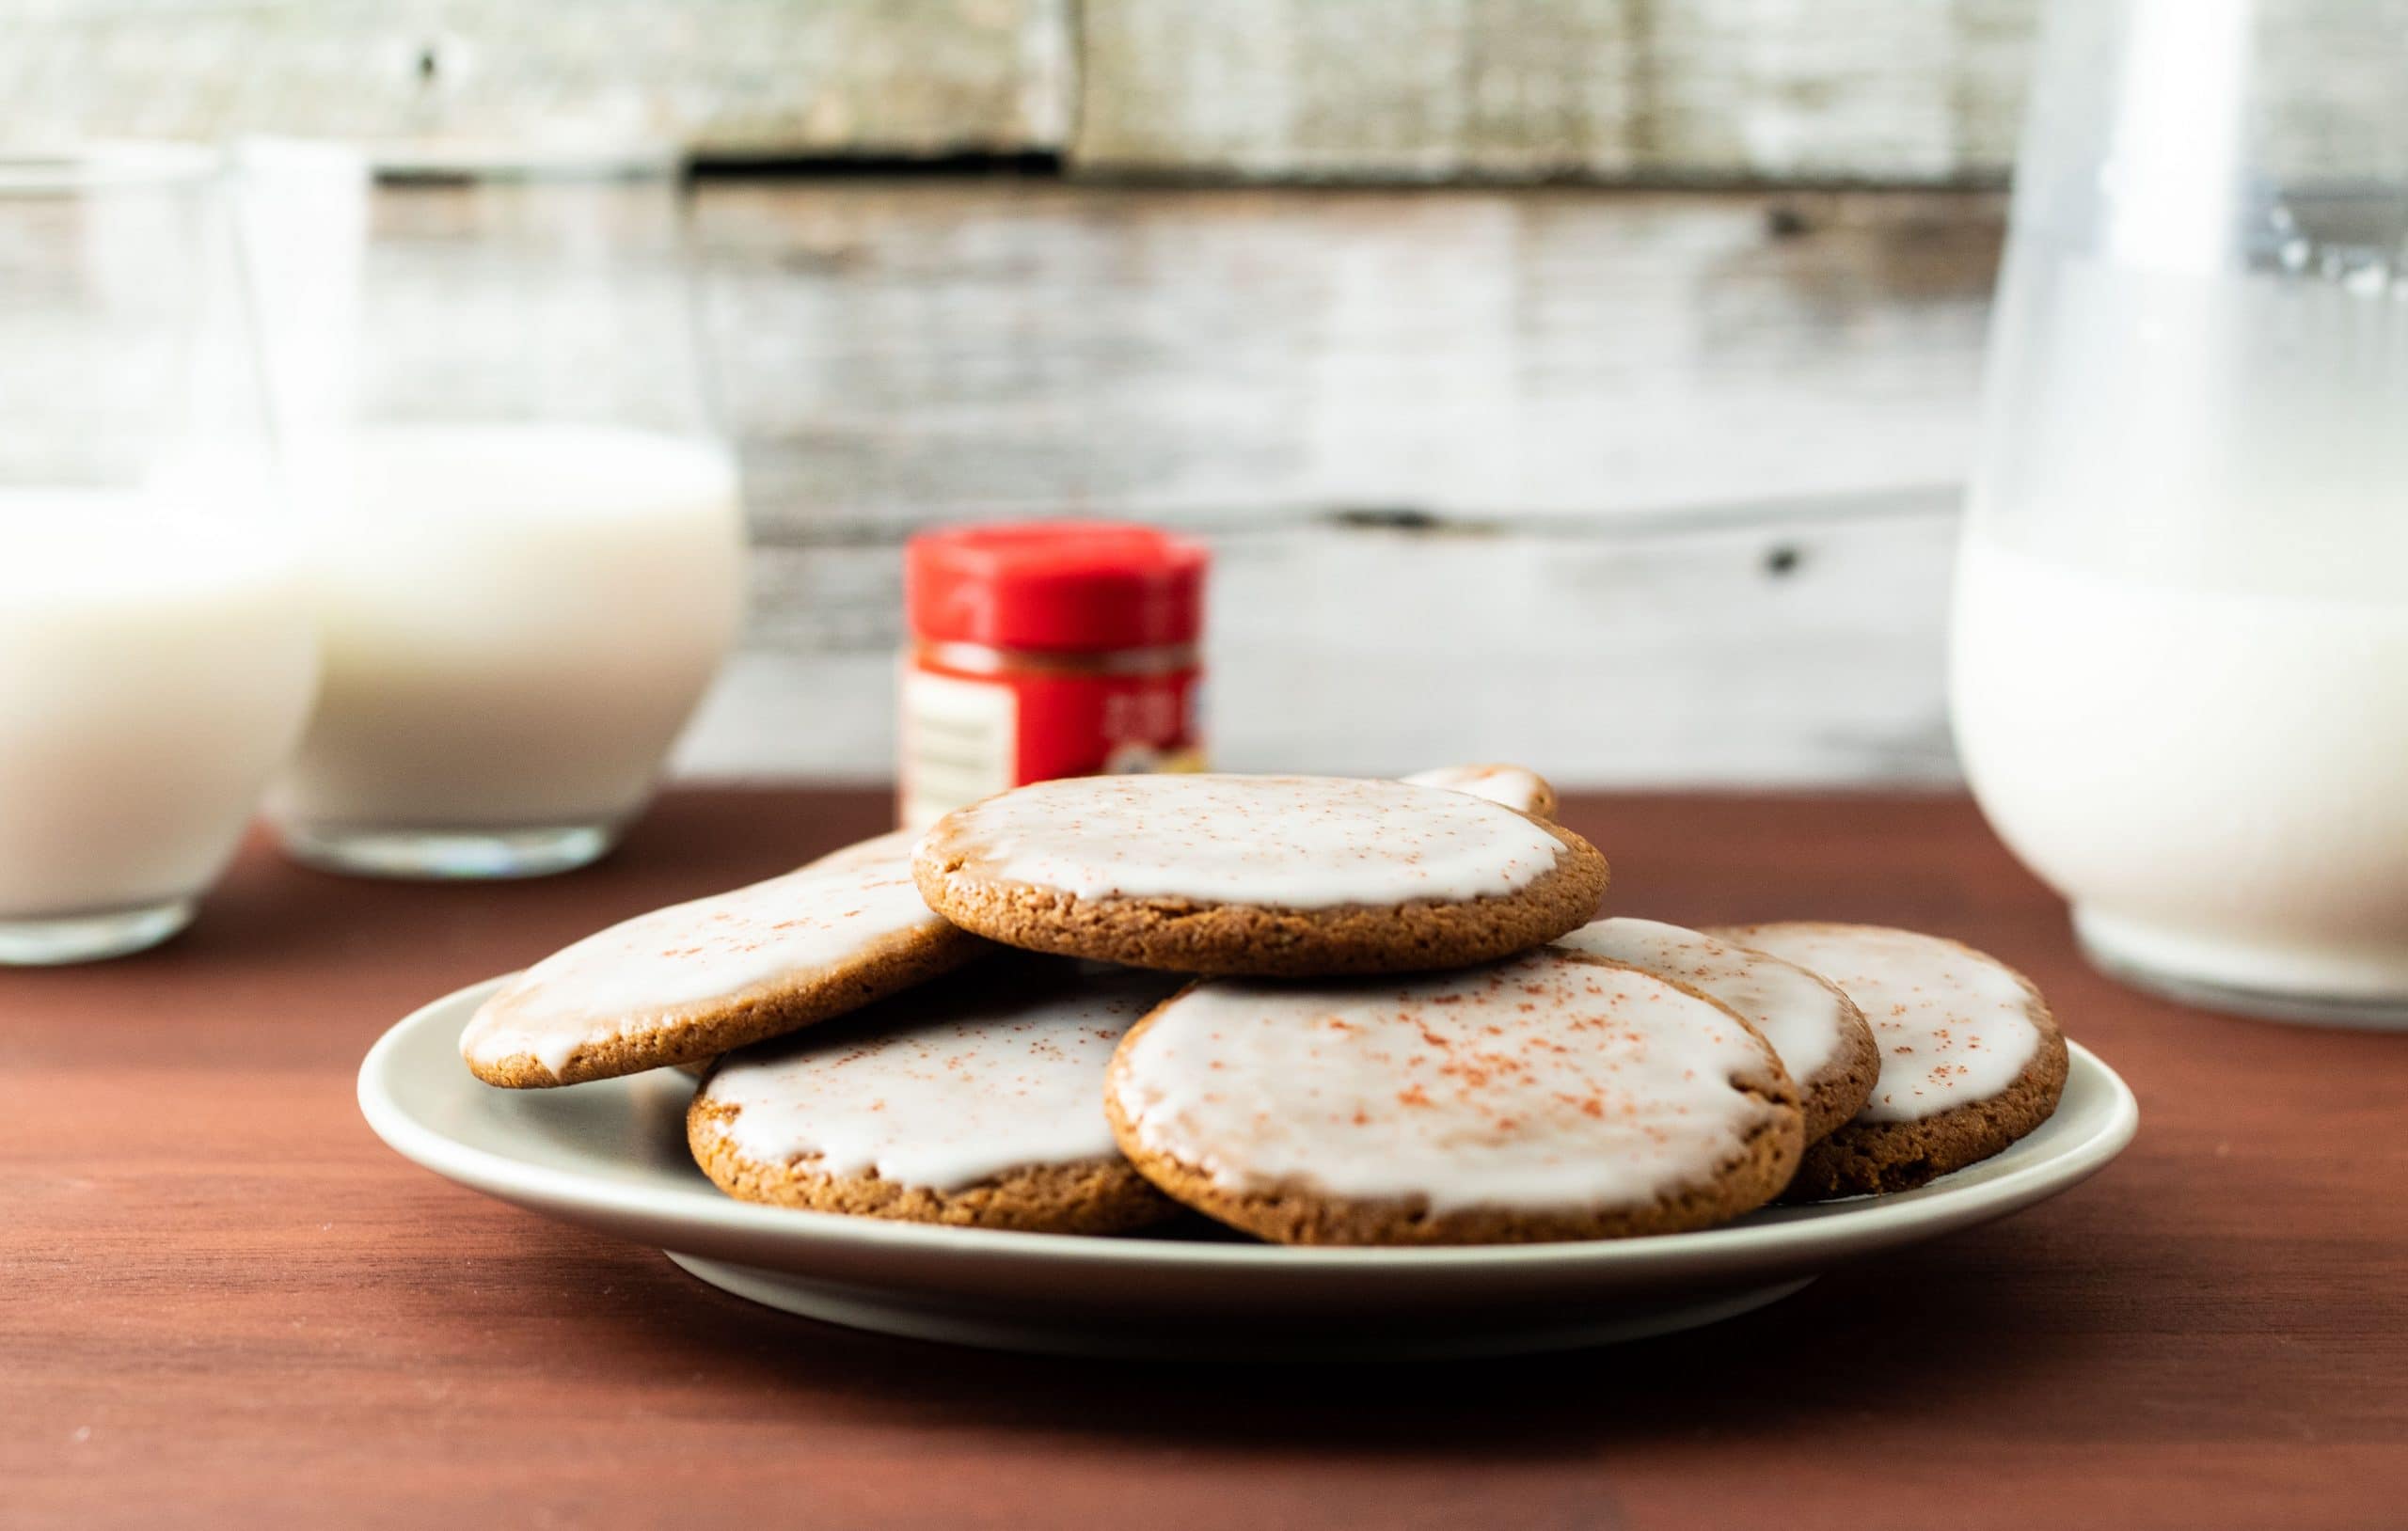 This is an image of our ginger ale cookies on a plate.